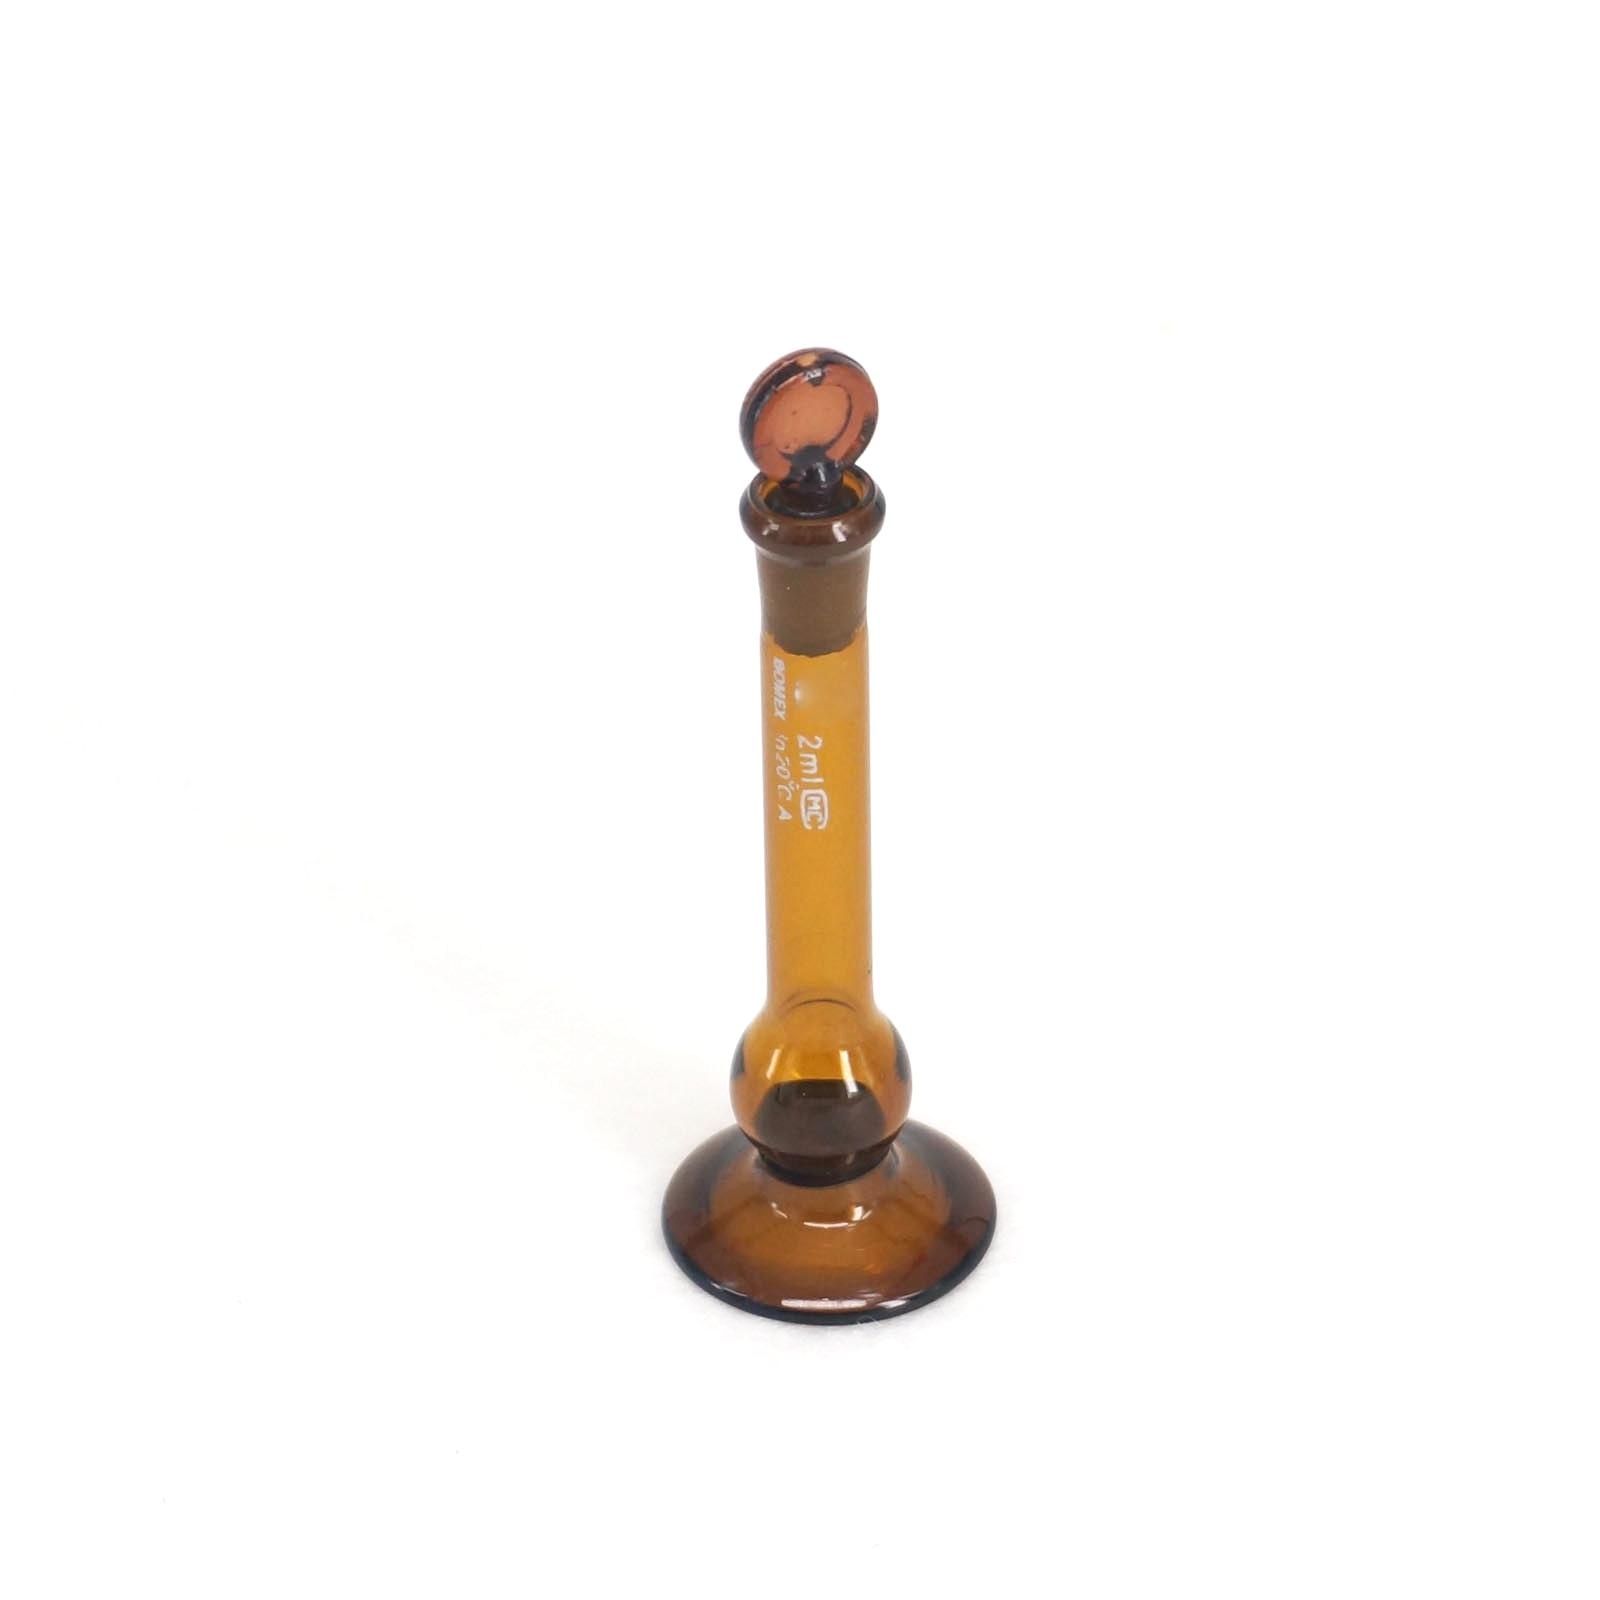 Volumetric Flask, Amber Class A, Micro Scale, With Glass Stoppers, As Per USP Standards